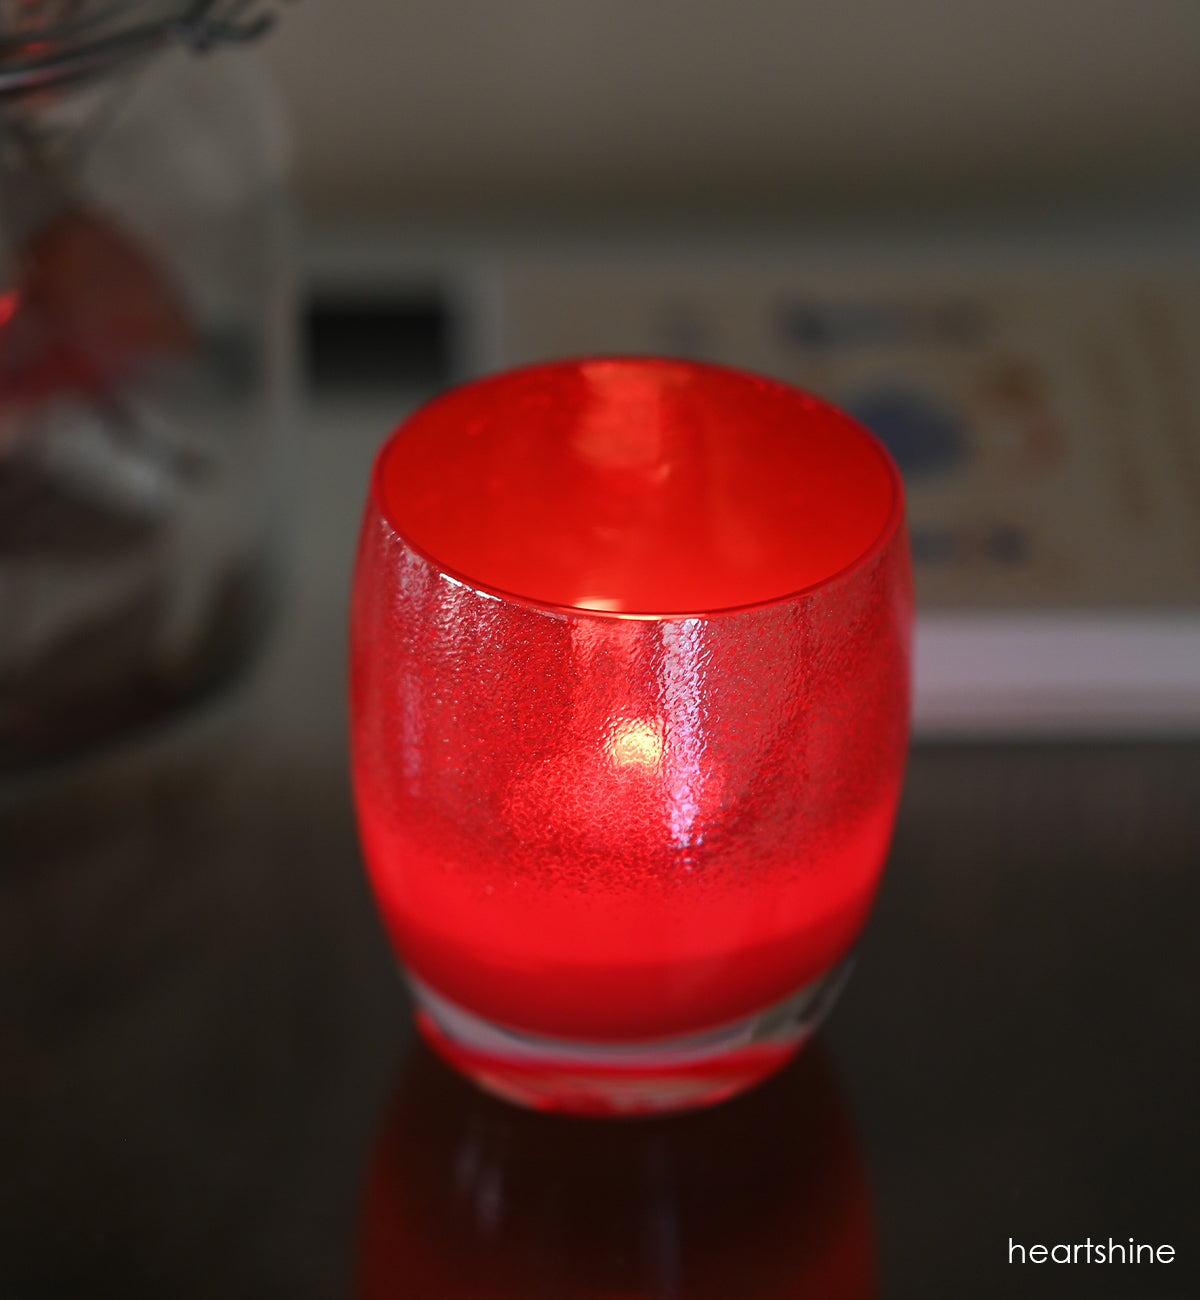 heartshine, shimmering glitter that enrobes the top of a bright red base, hand-blown glass votive candle holder.